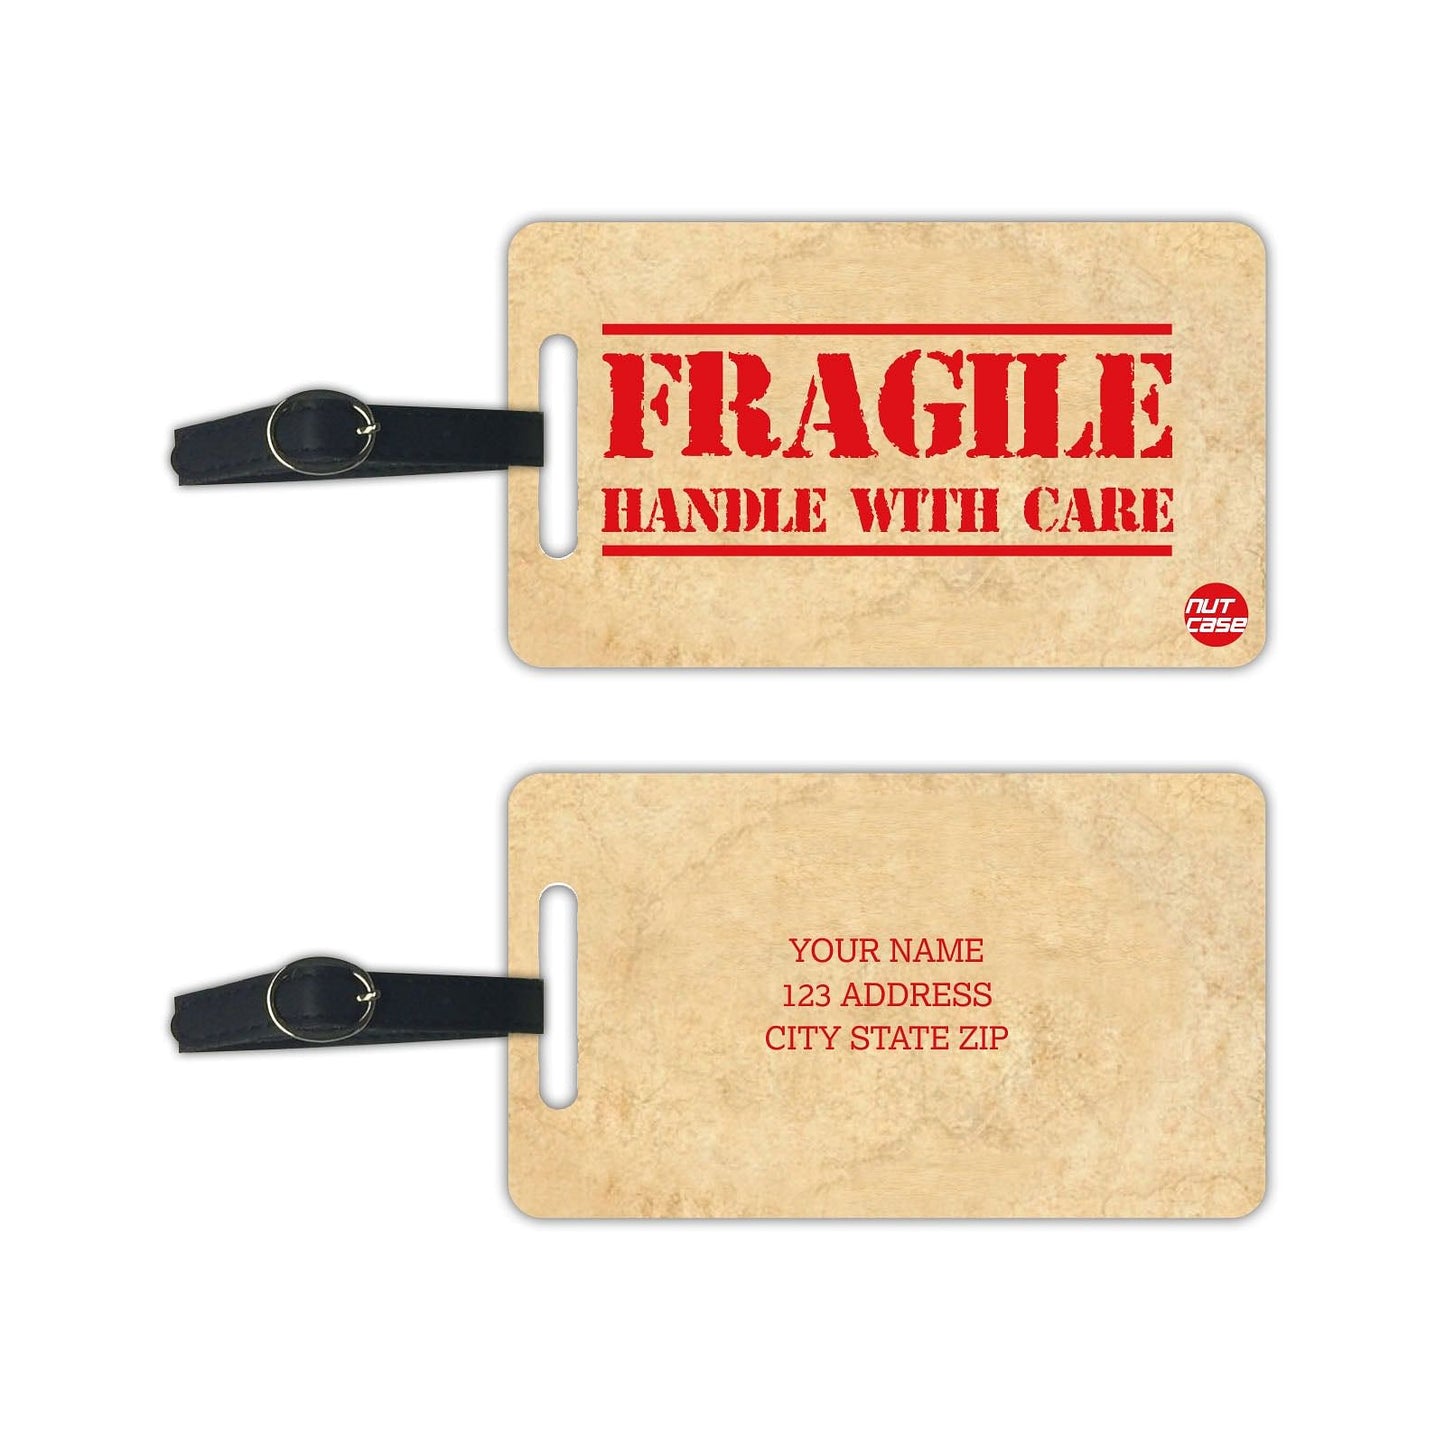 Custom Travel Luggage Tags - Add your Name - Set of 2 Nutcase